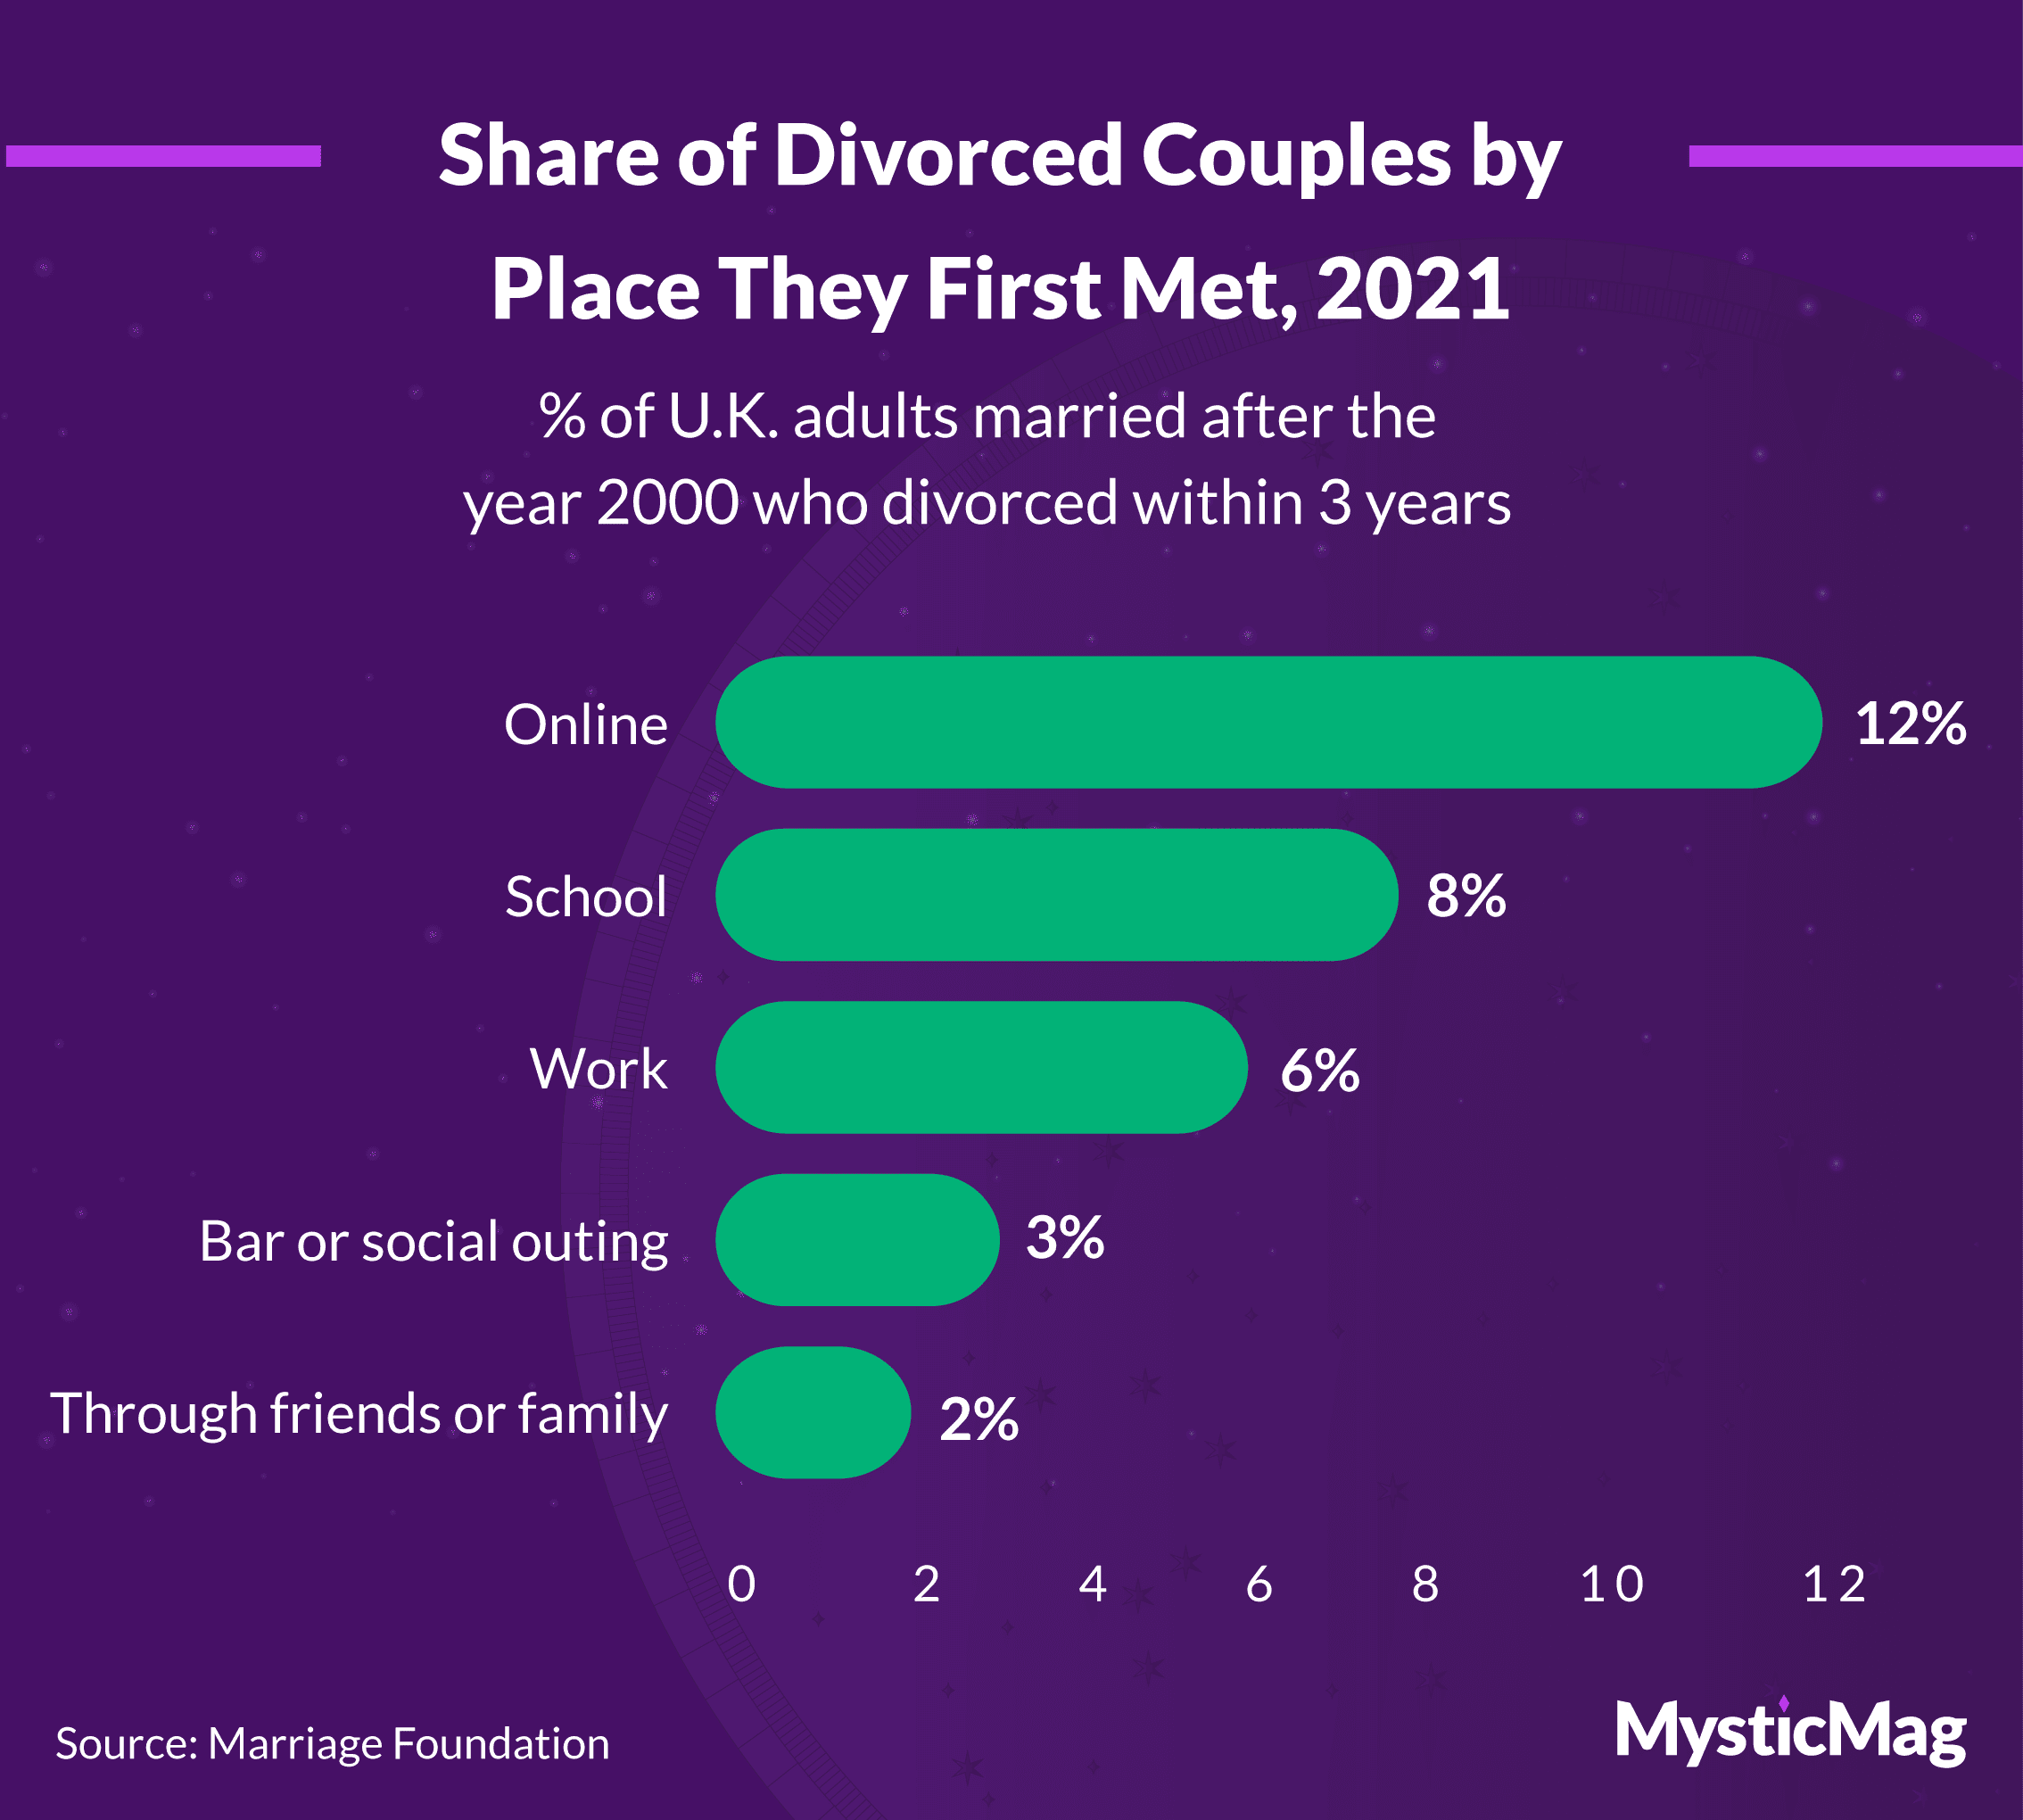 Share of divorced couples by place they first met, 2021